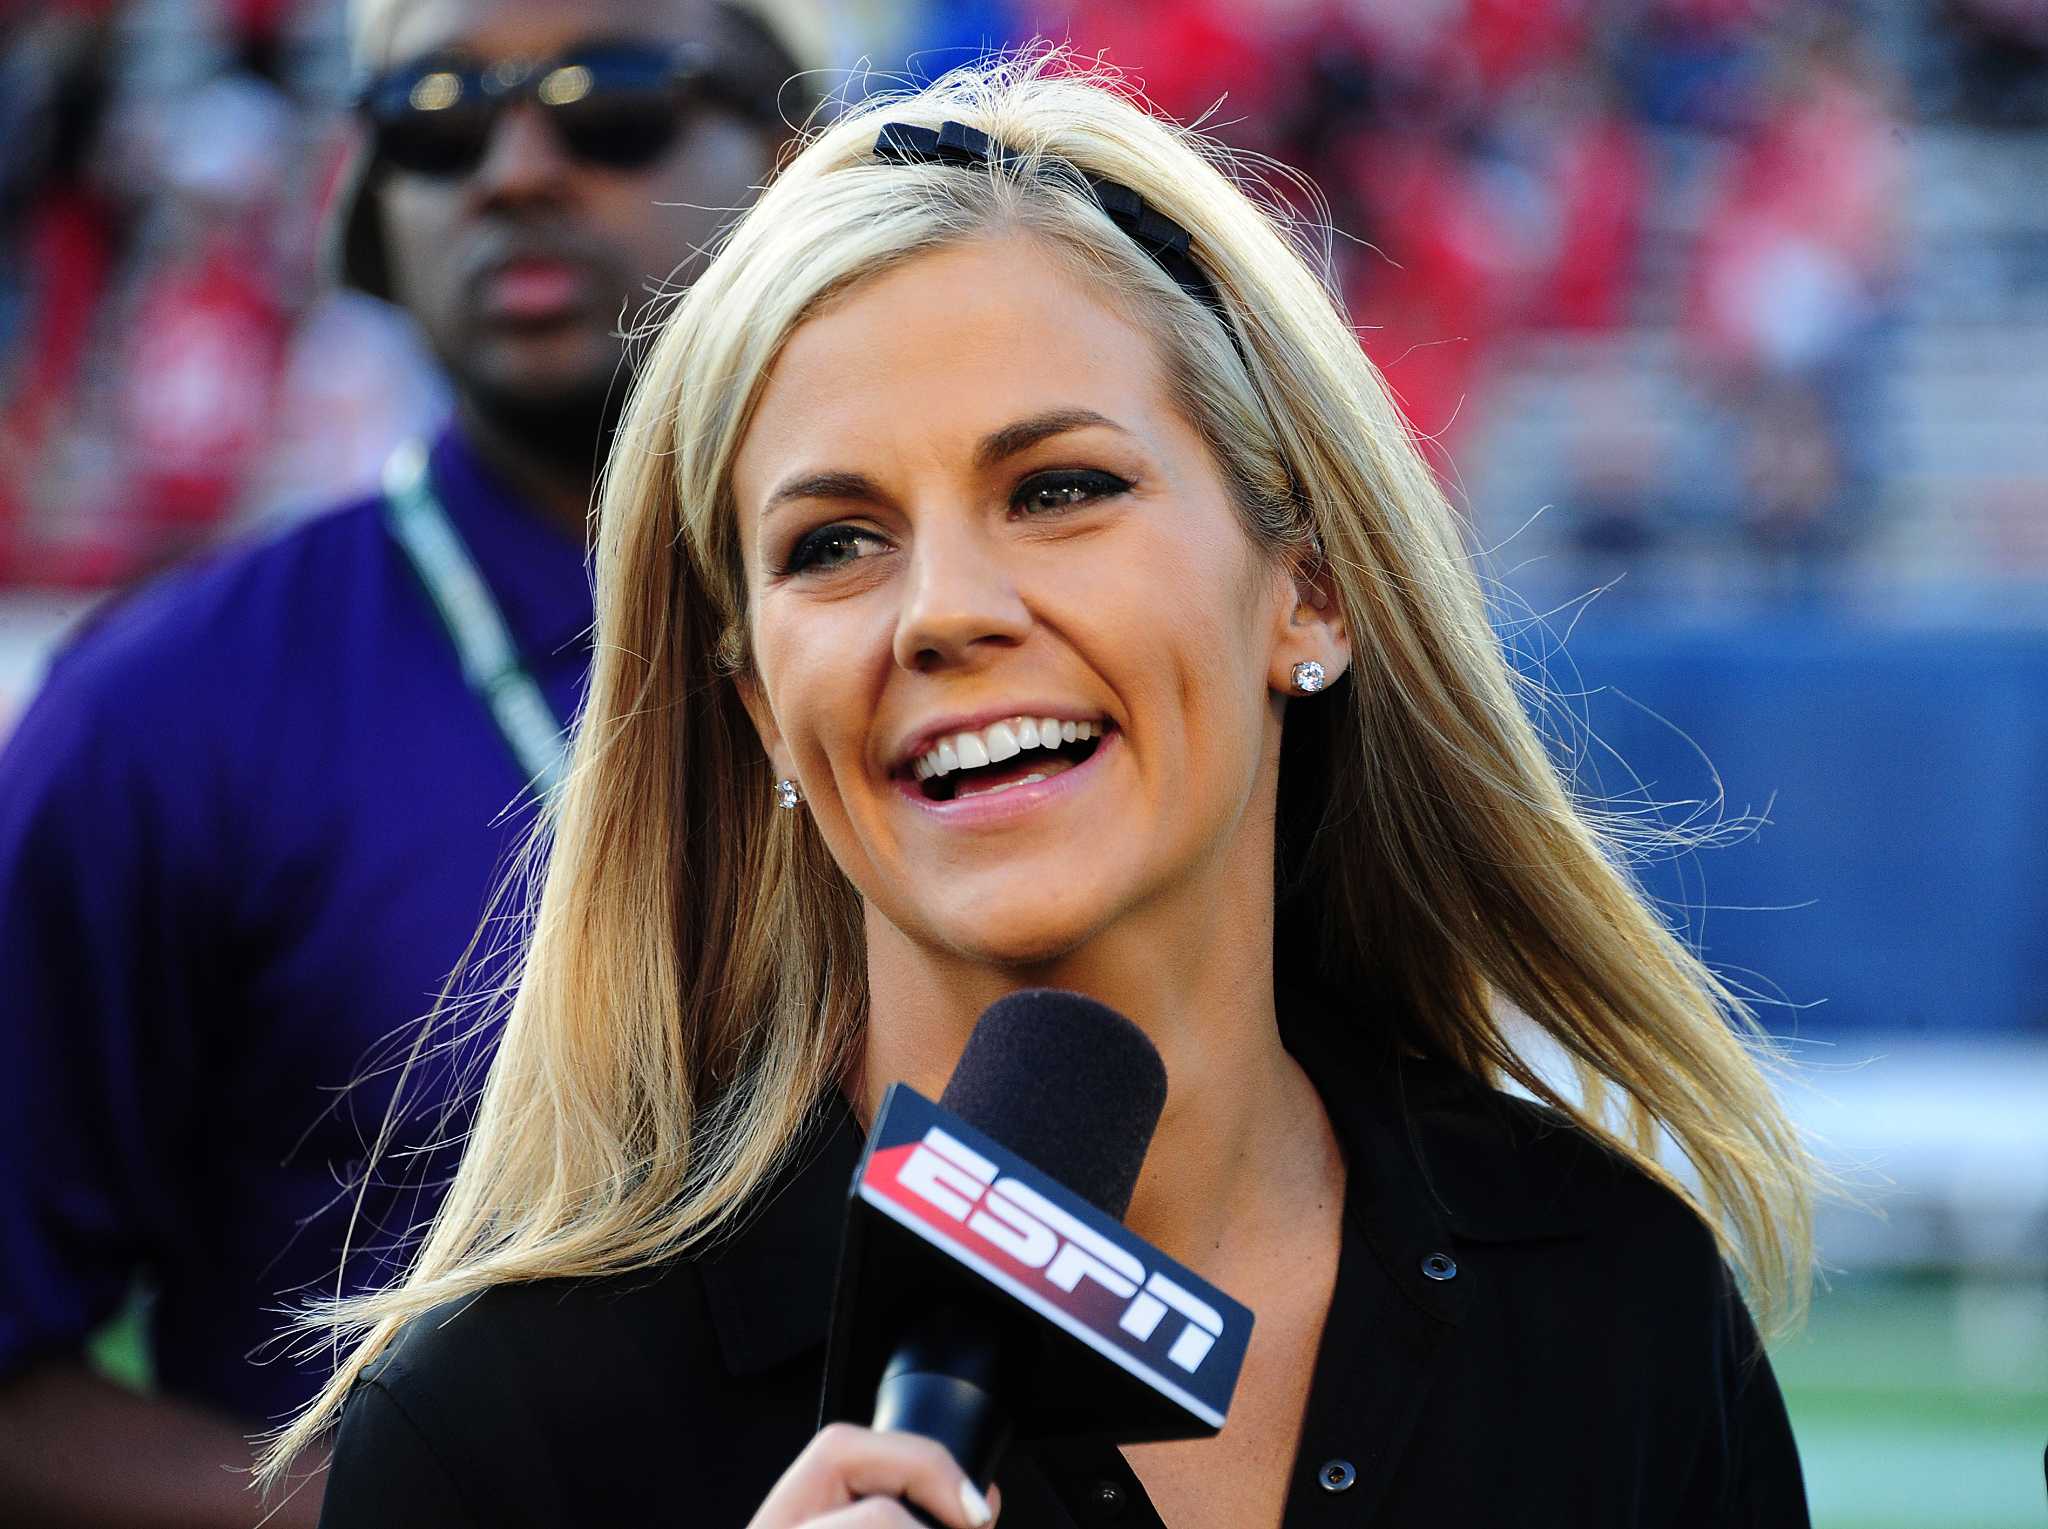 ESPN's Samantha Ponder opens up on new role as 'Sunday NFL Countdown